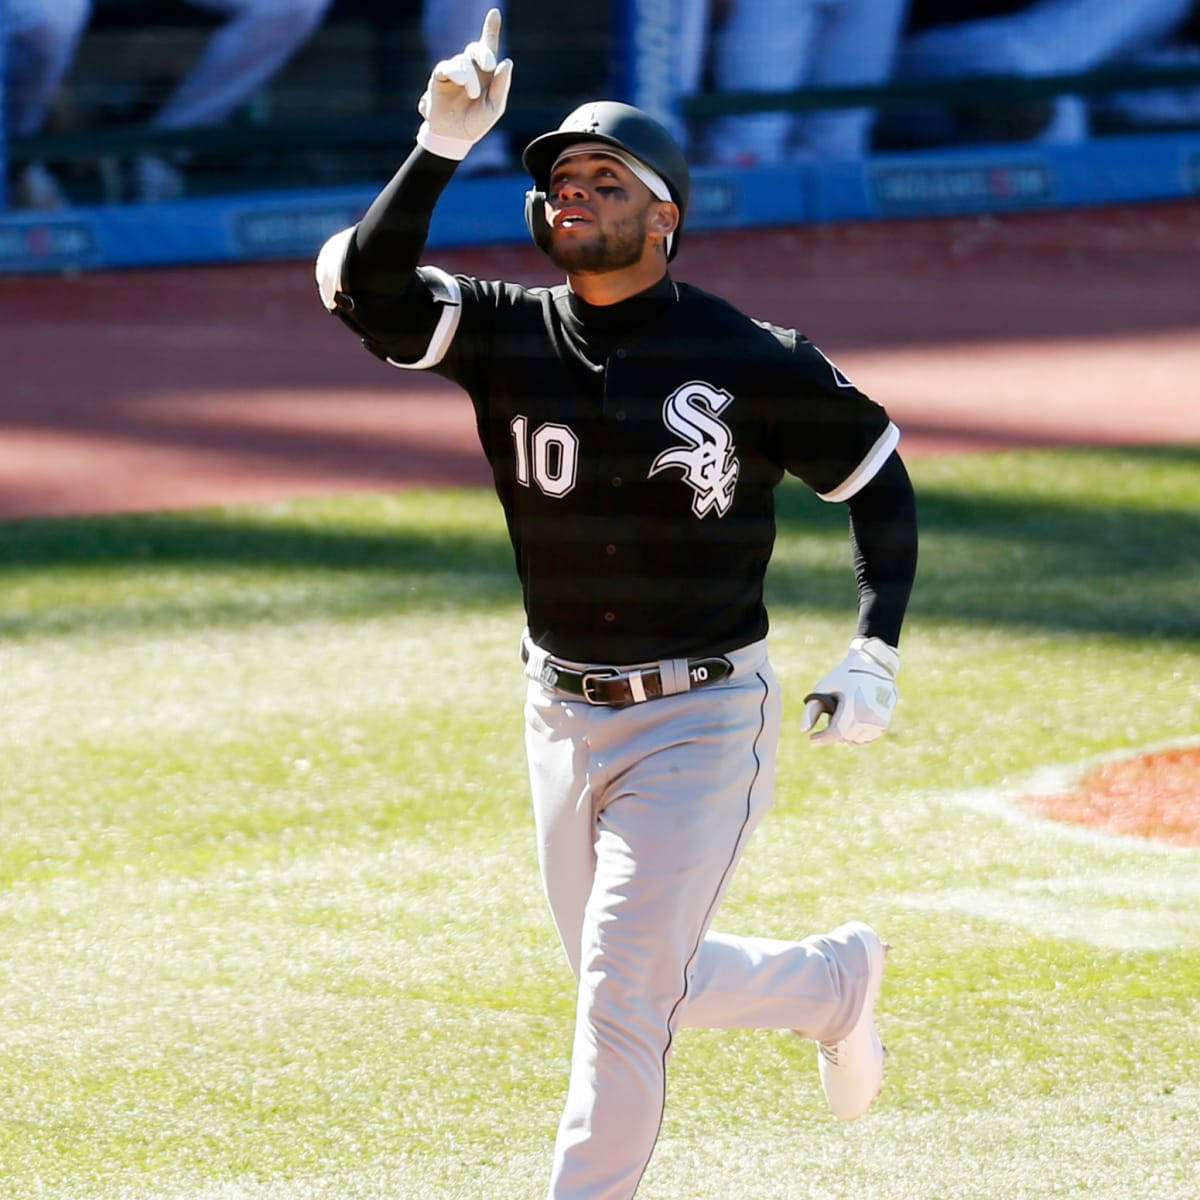 Download Yoan Moncada Running And Pointing Up Wallpaper